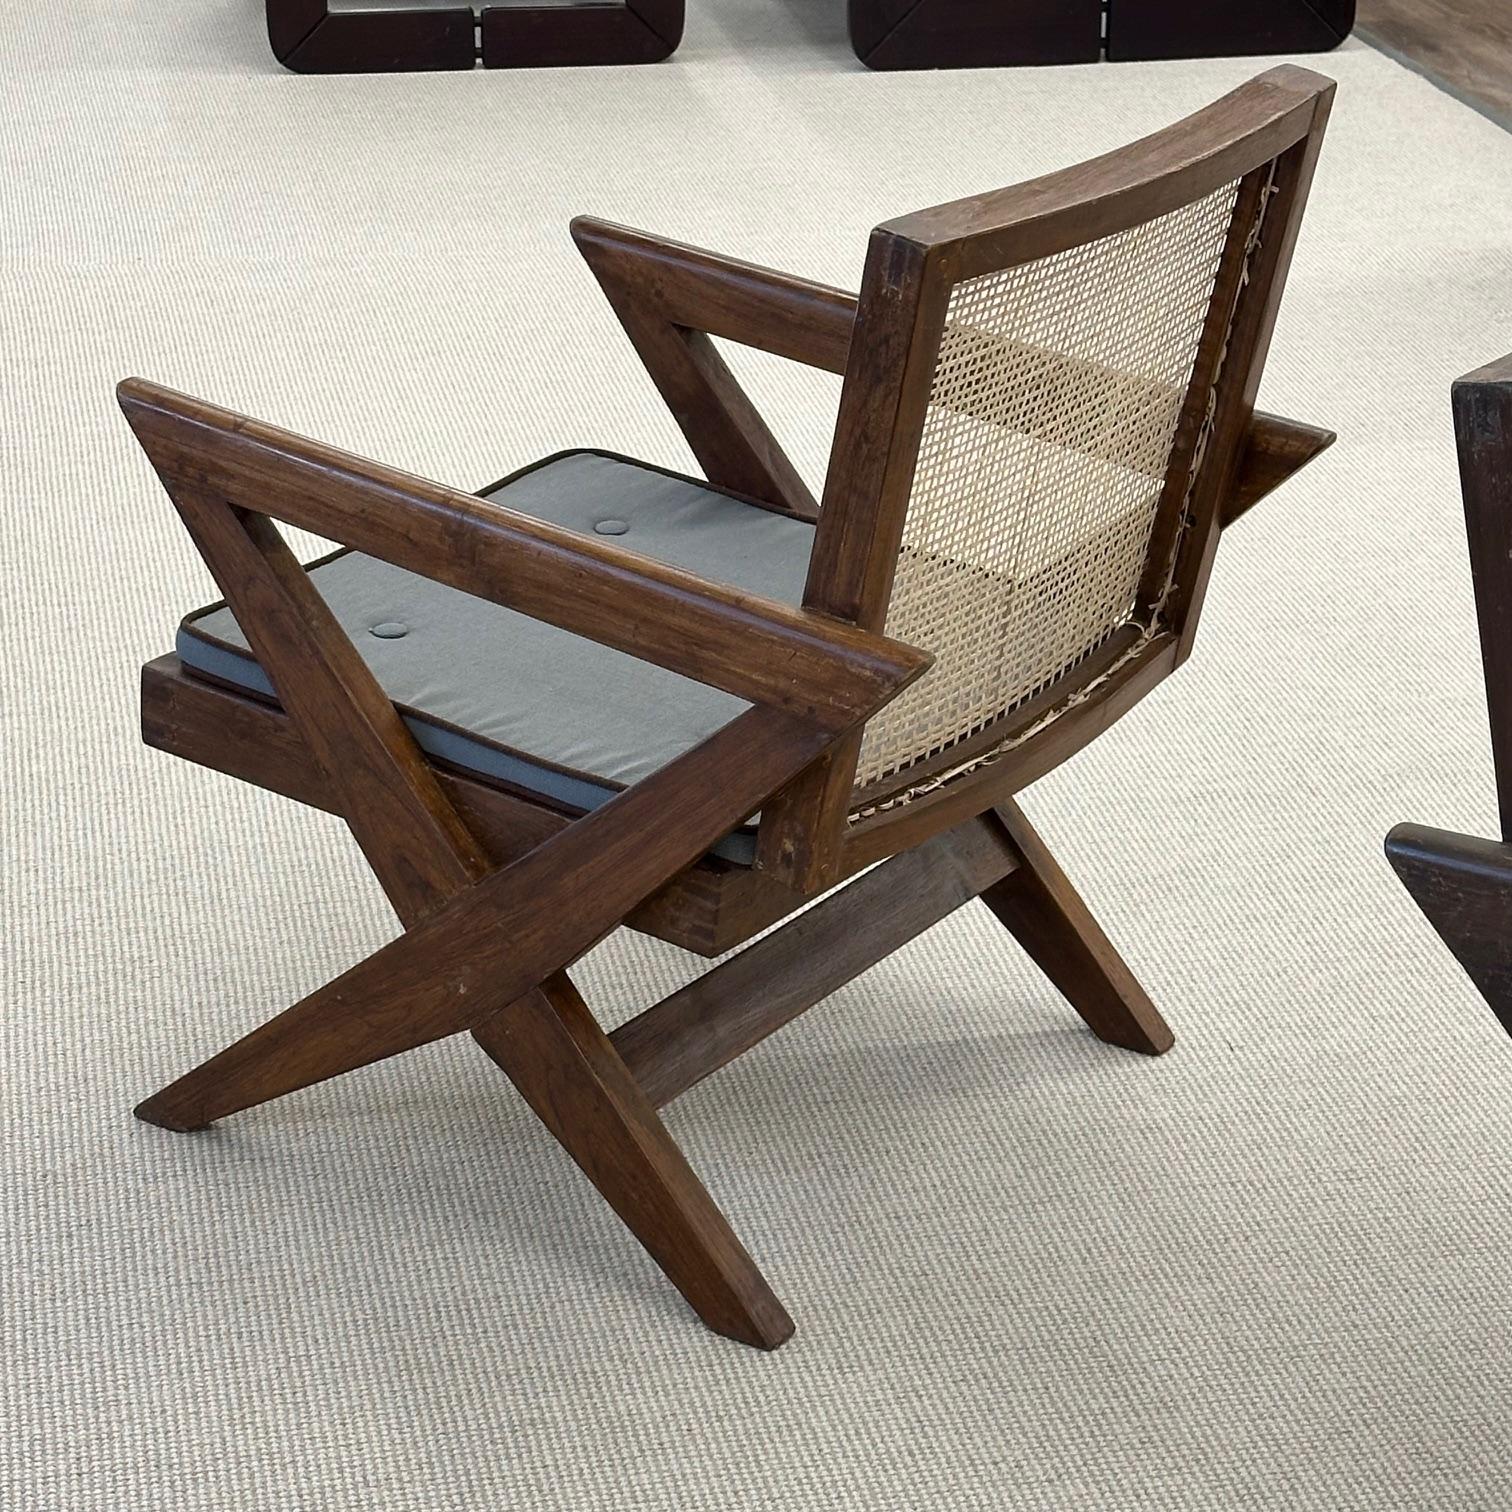 Pierre Jeanneret, French Mid-Century Modern, Lounge Chairs, Chandigarh, 1950s For Sale 3